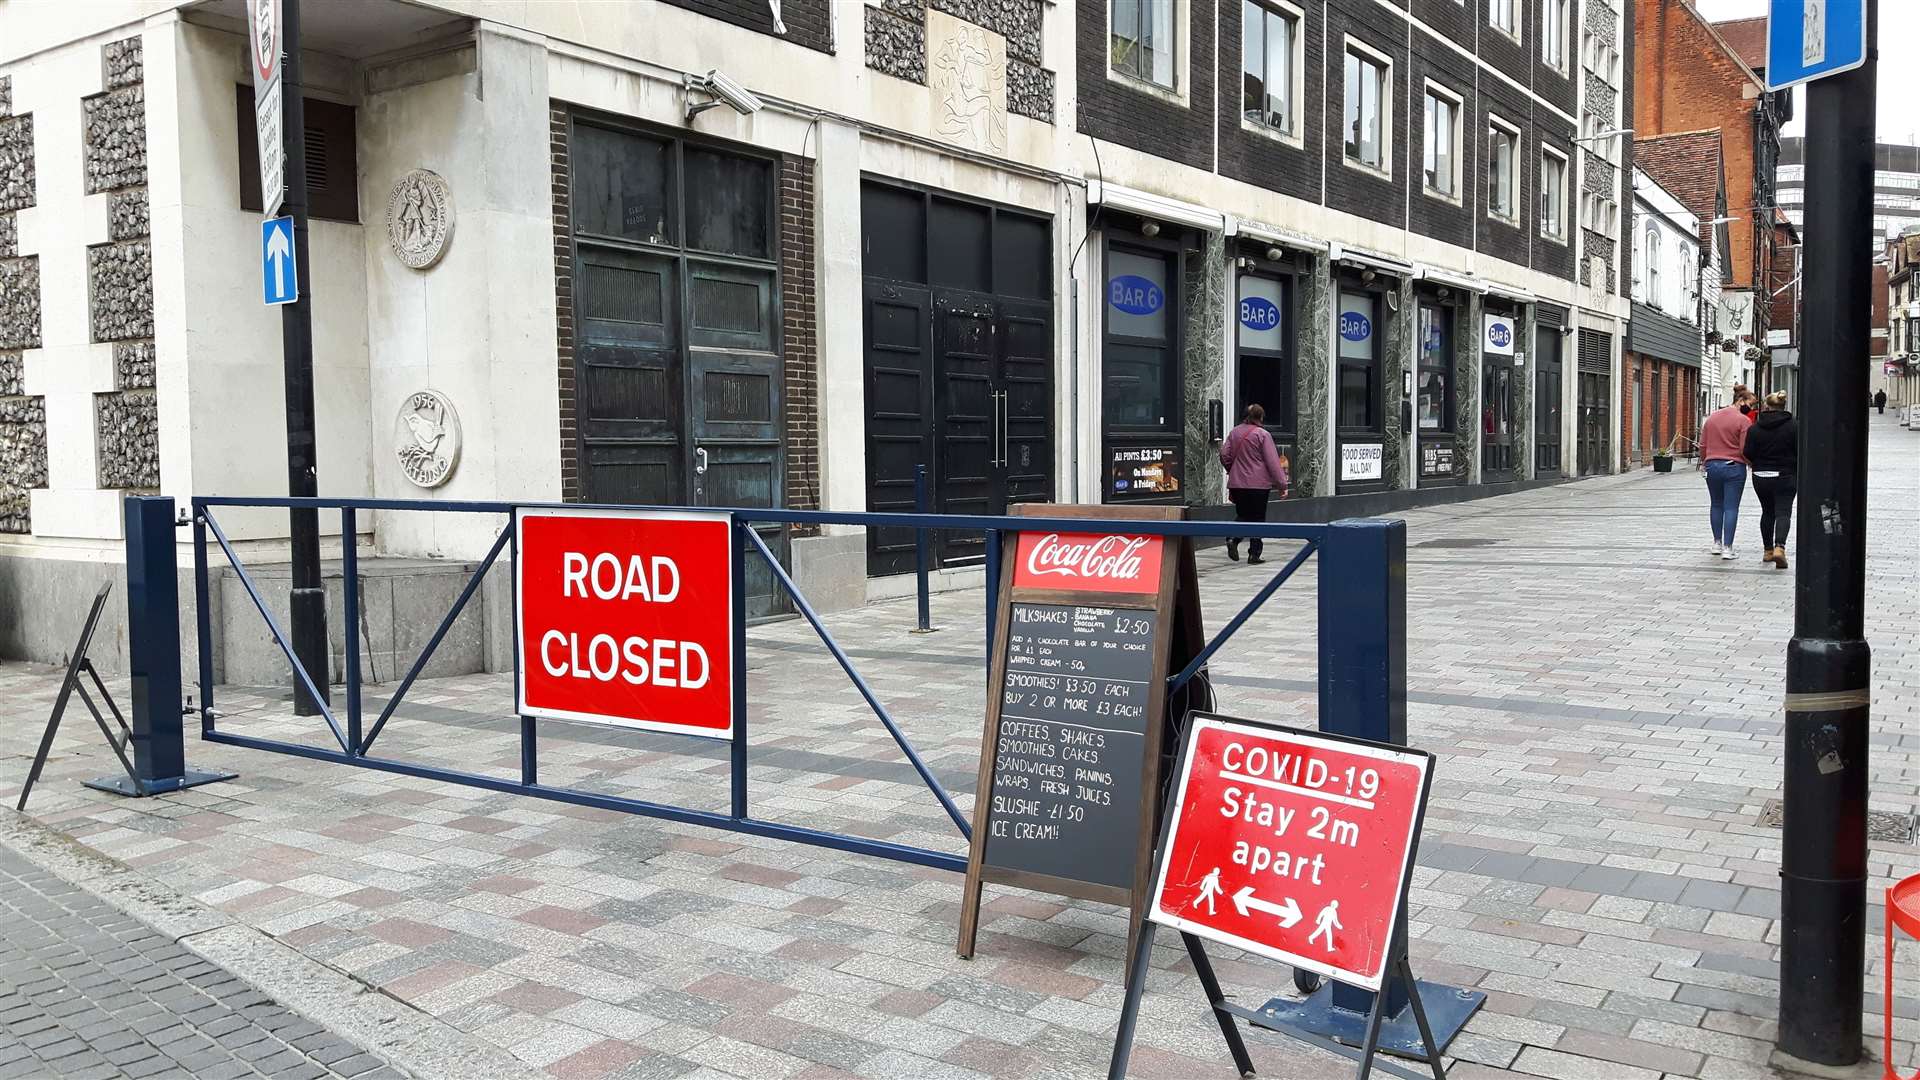 Maidstone council's new measures to enforce the pedestrian zone in Middle Row, Maidstone